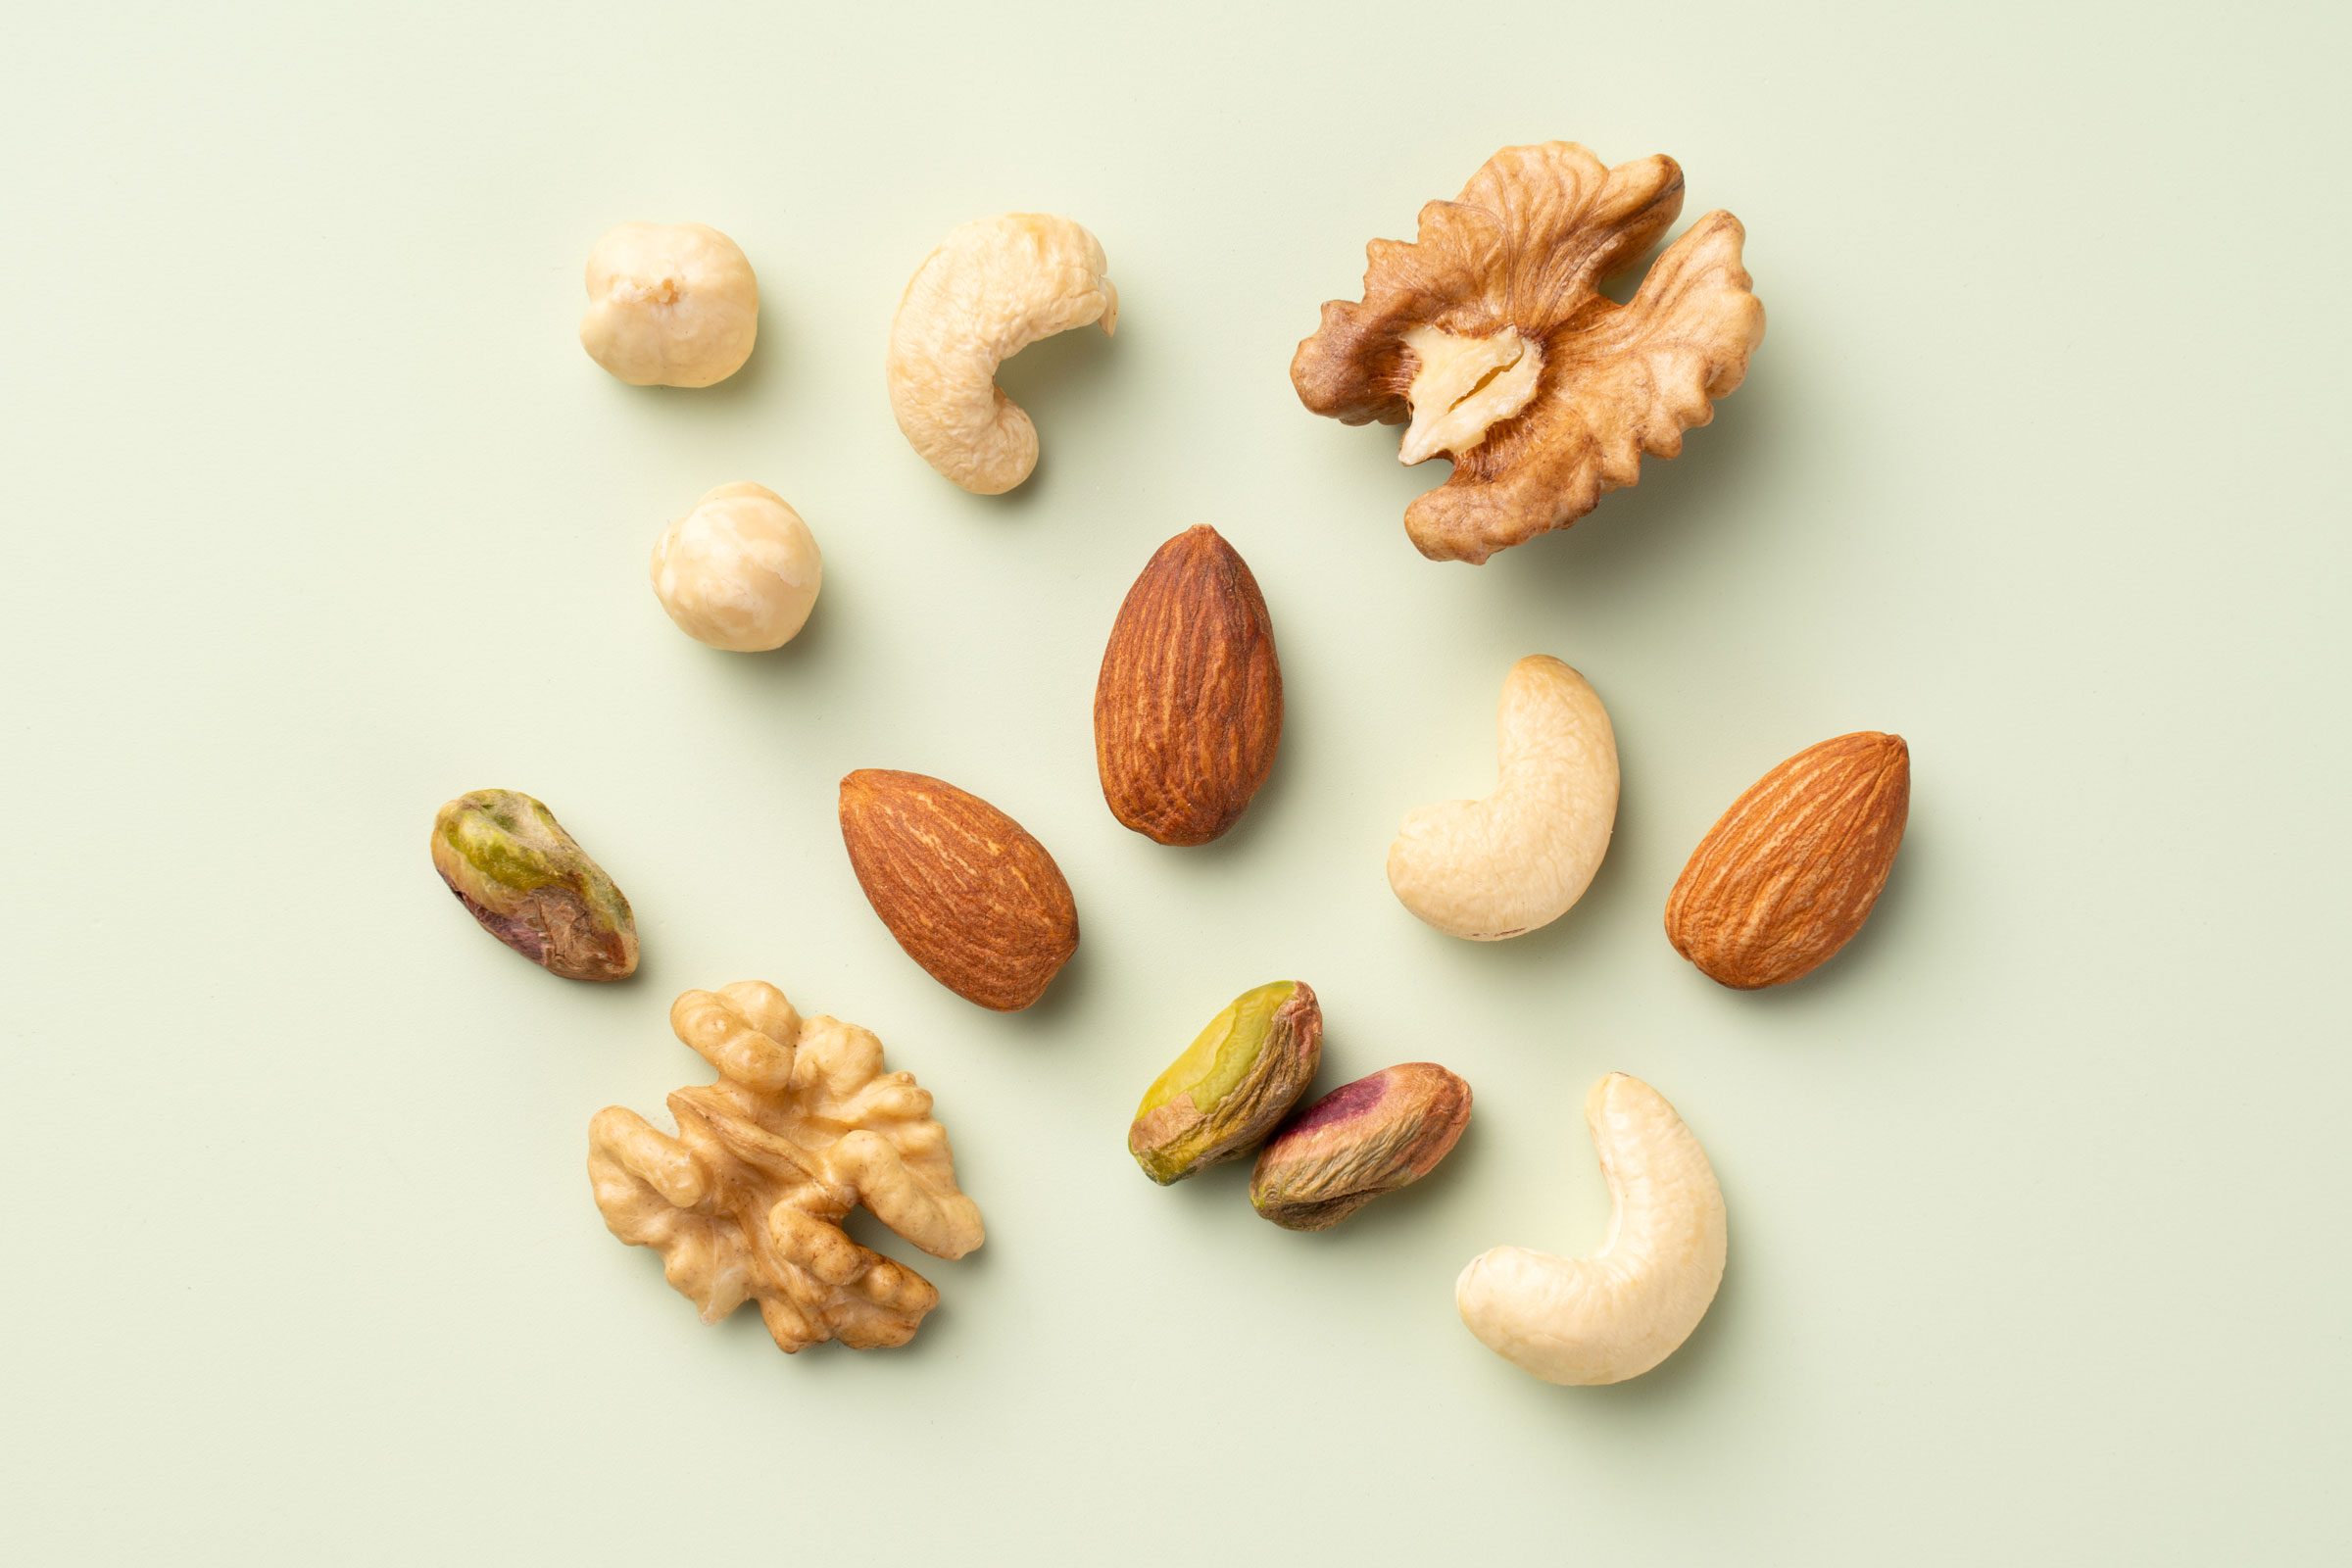 Eating This Nut Will Help Your Gut and Reduce Inflammation, New Study Says